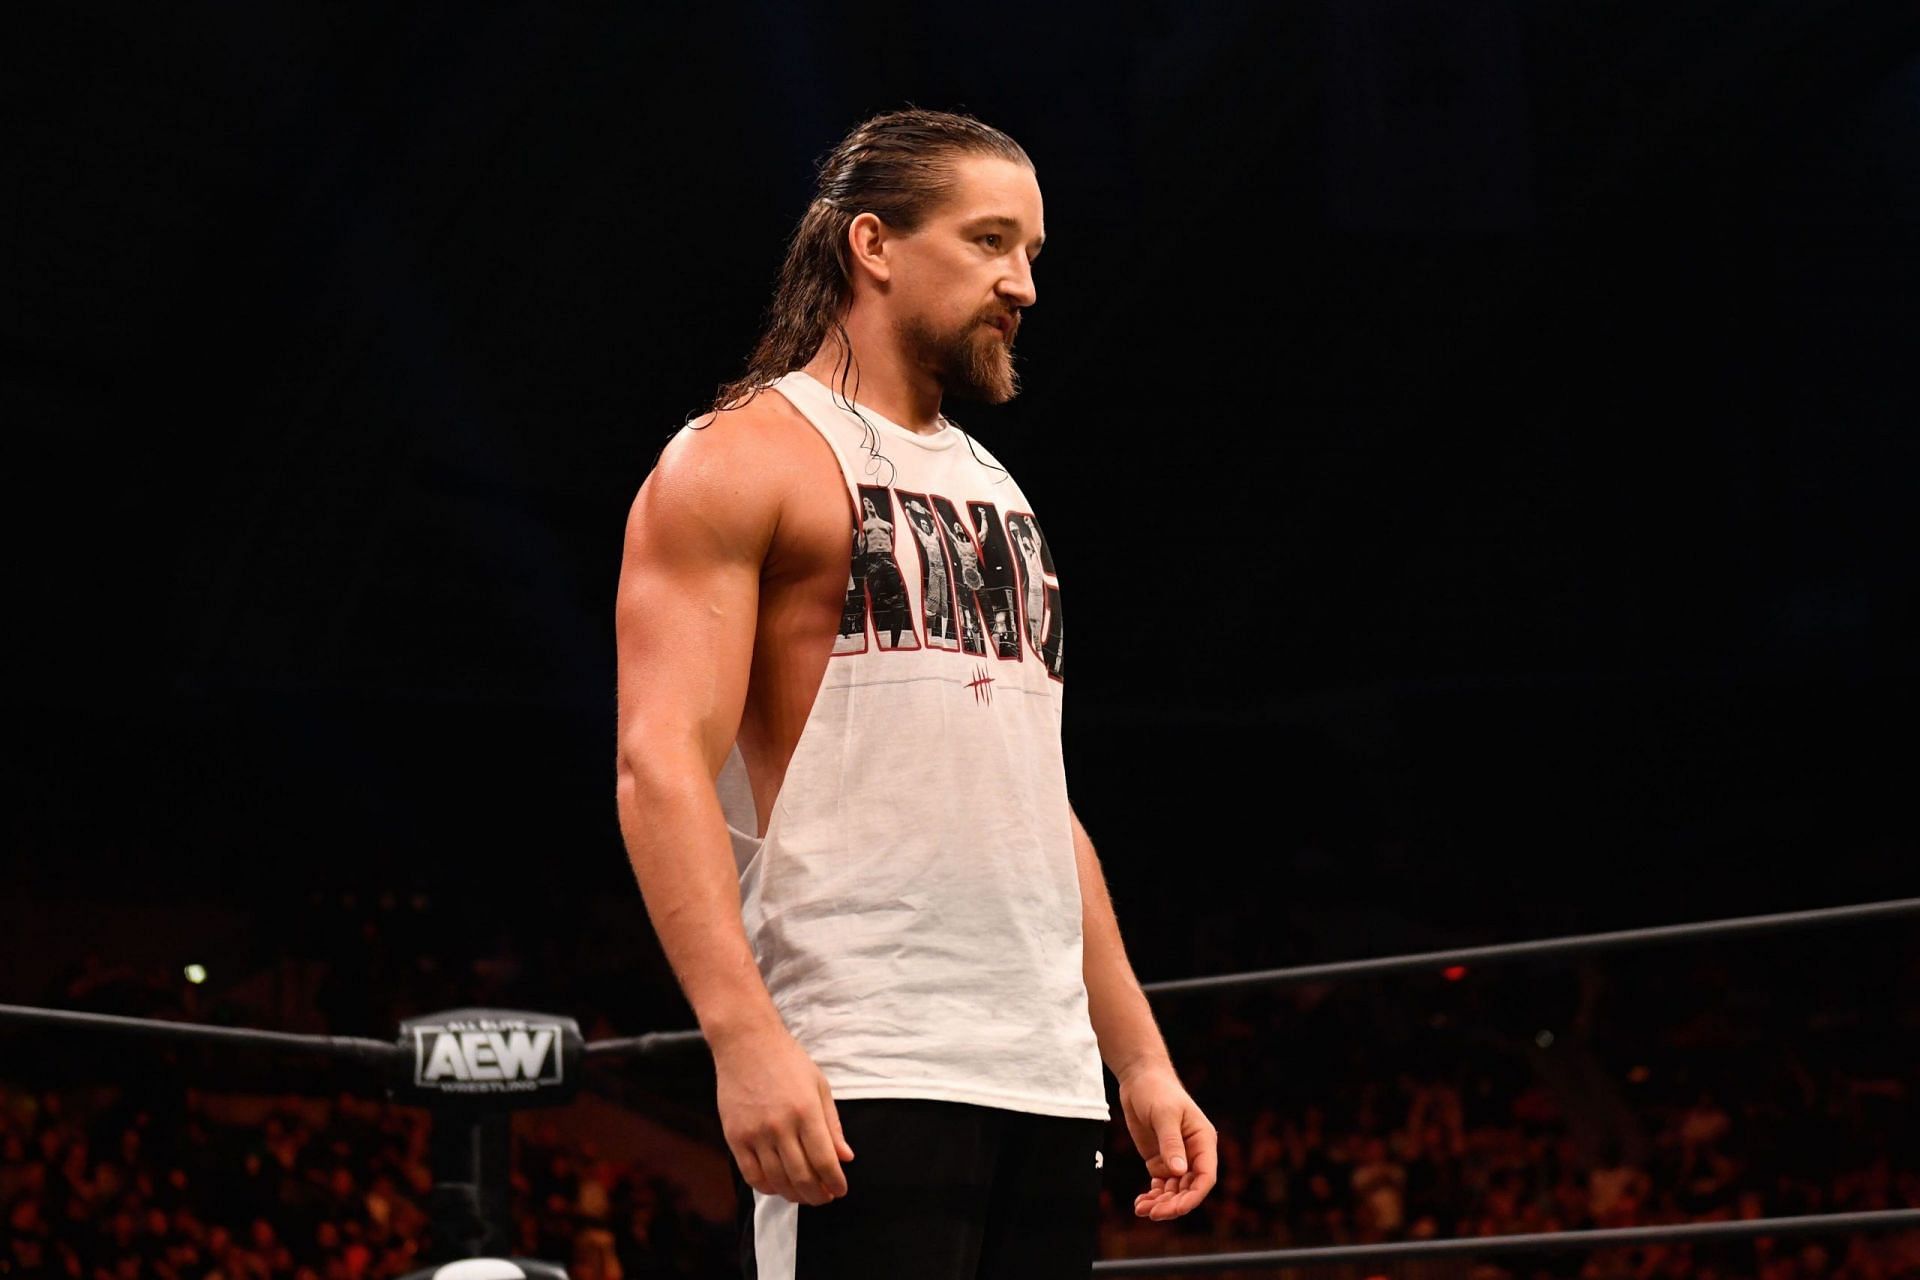 Jay White has been making big moves in the world of pro wrestling